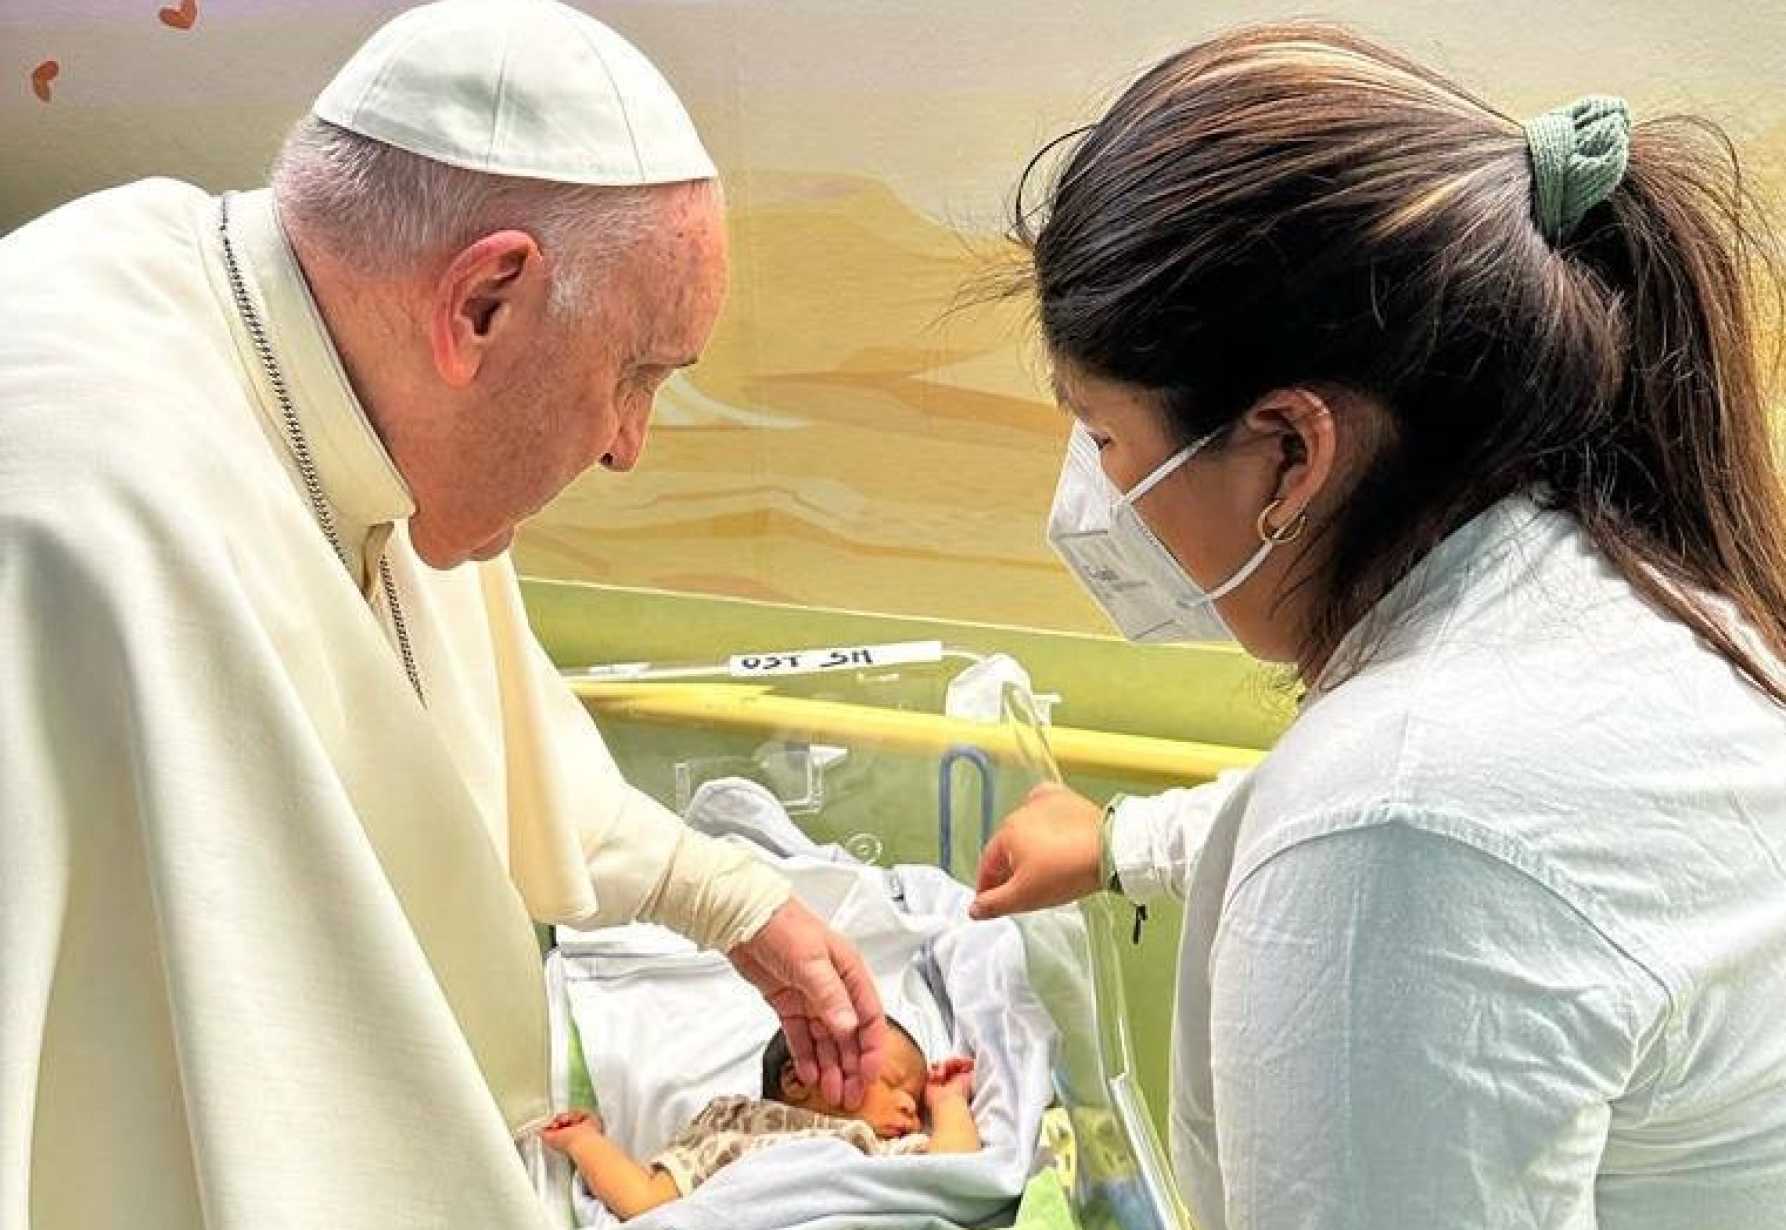 UPDATE: Doctors say pope can be discharged from hospital